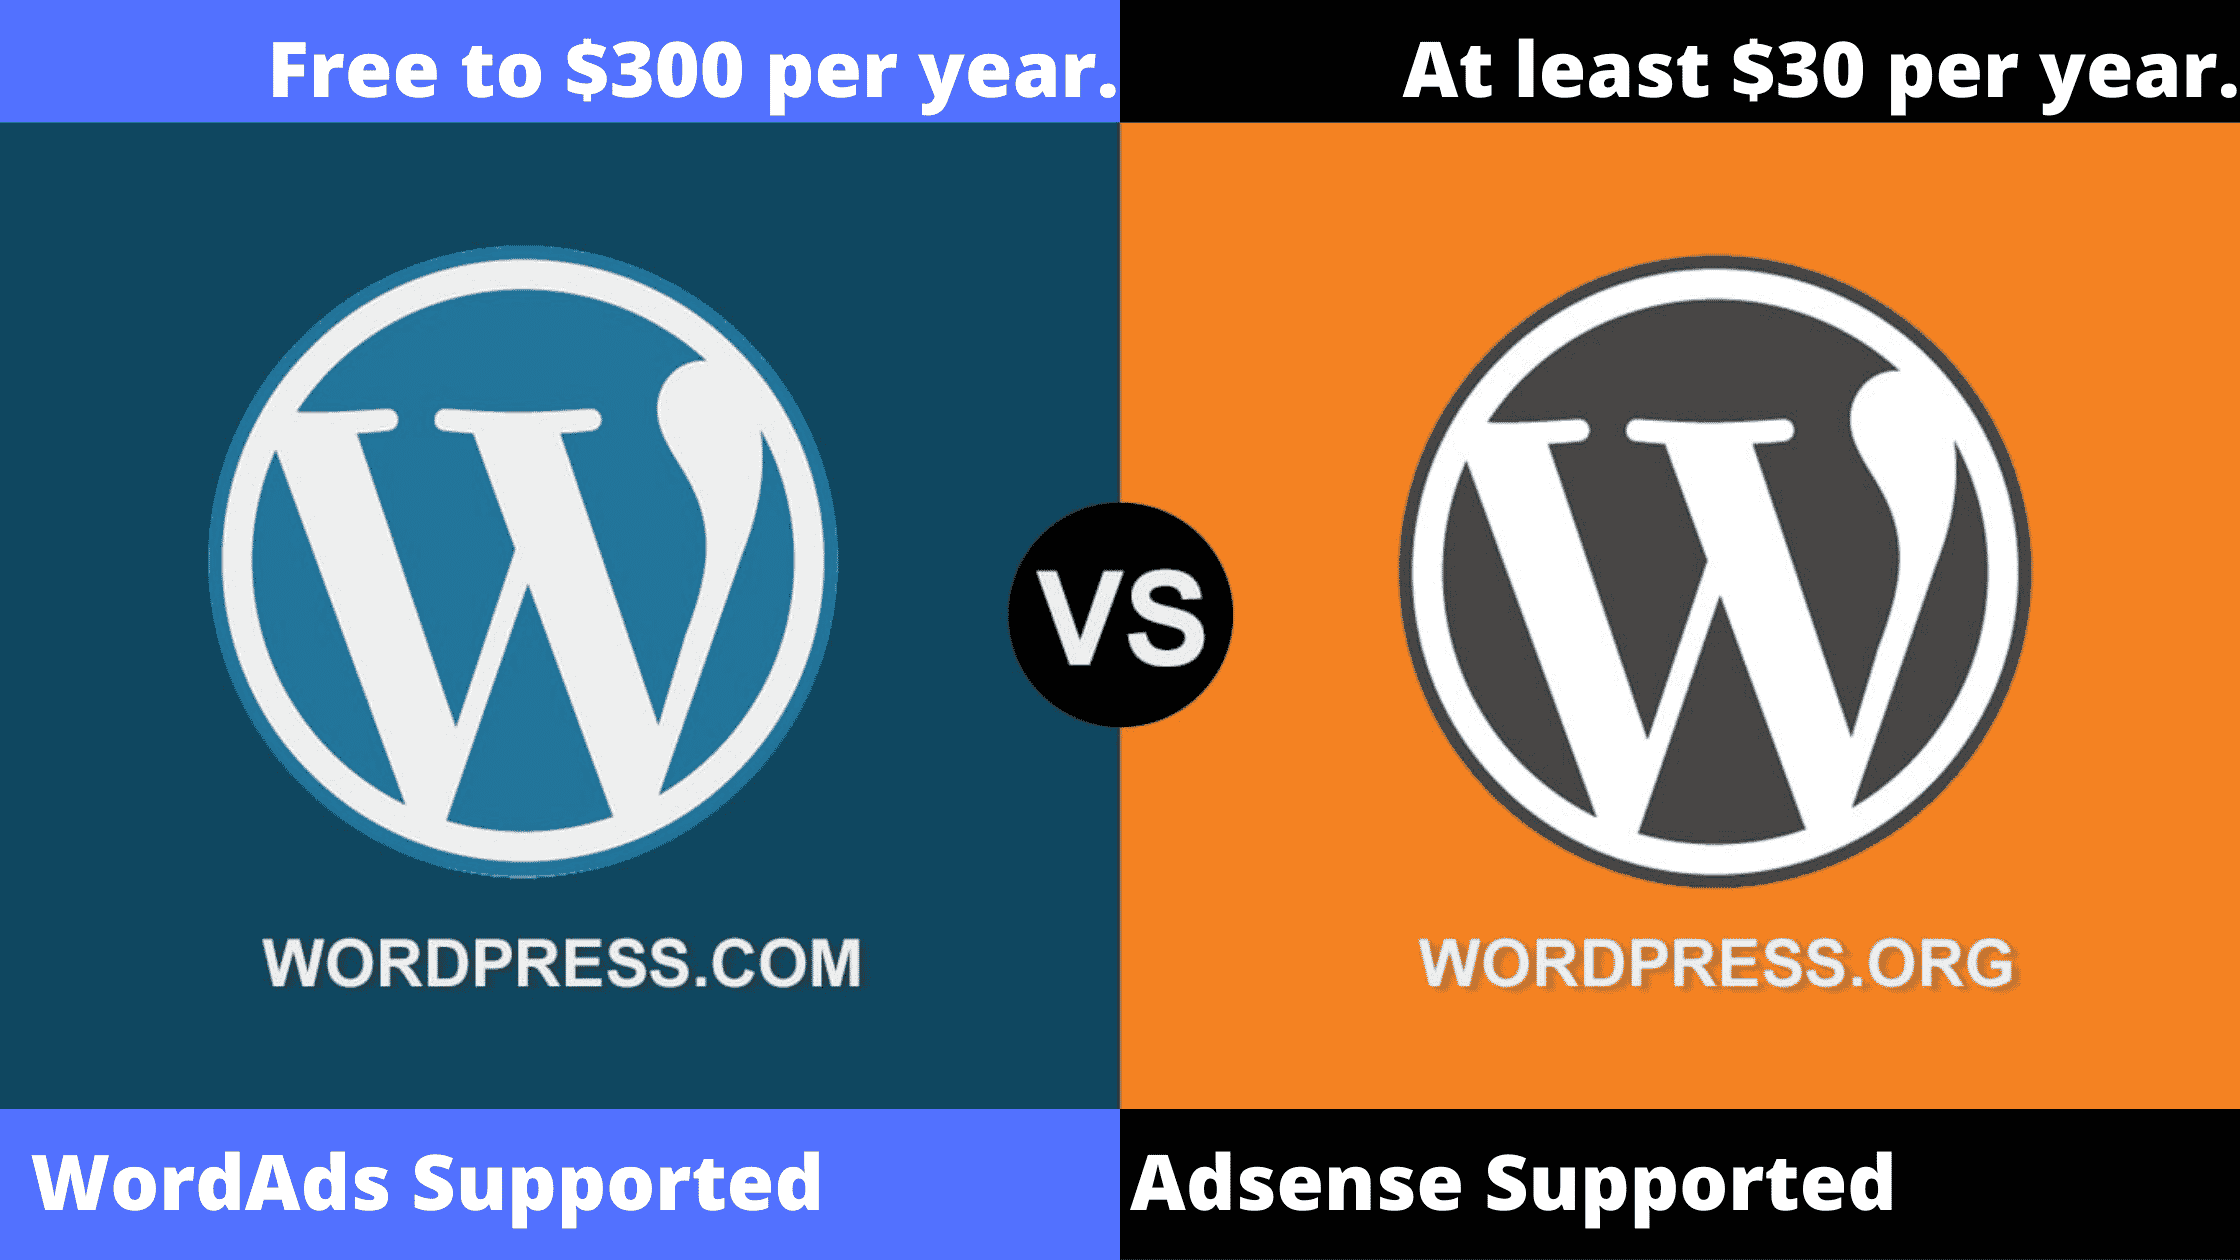 WordPress.com or WordPress.org What's the difference